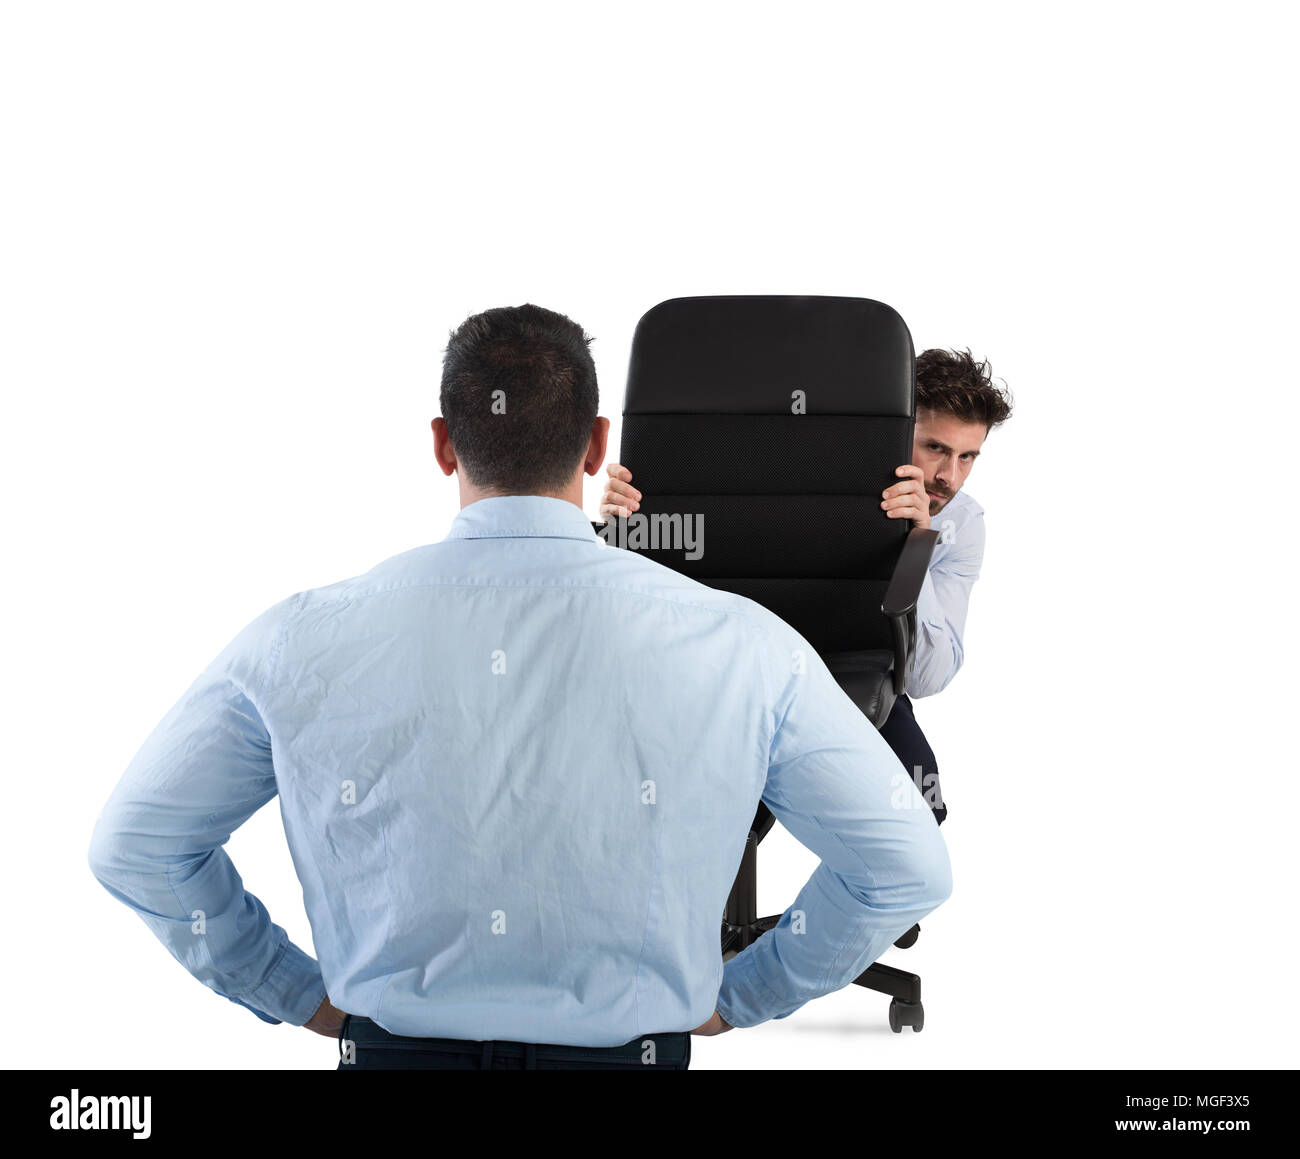 Businessman is afraid of his boss Stock Photo